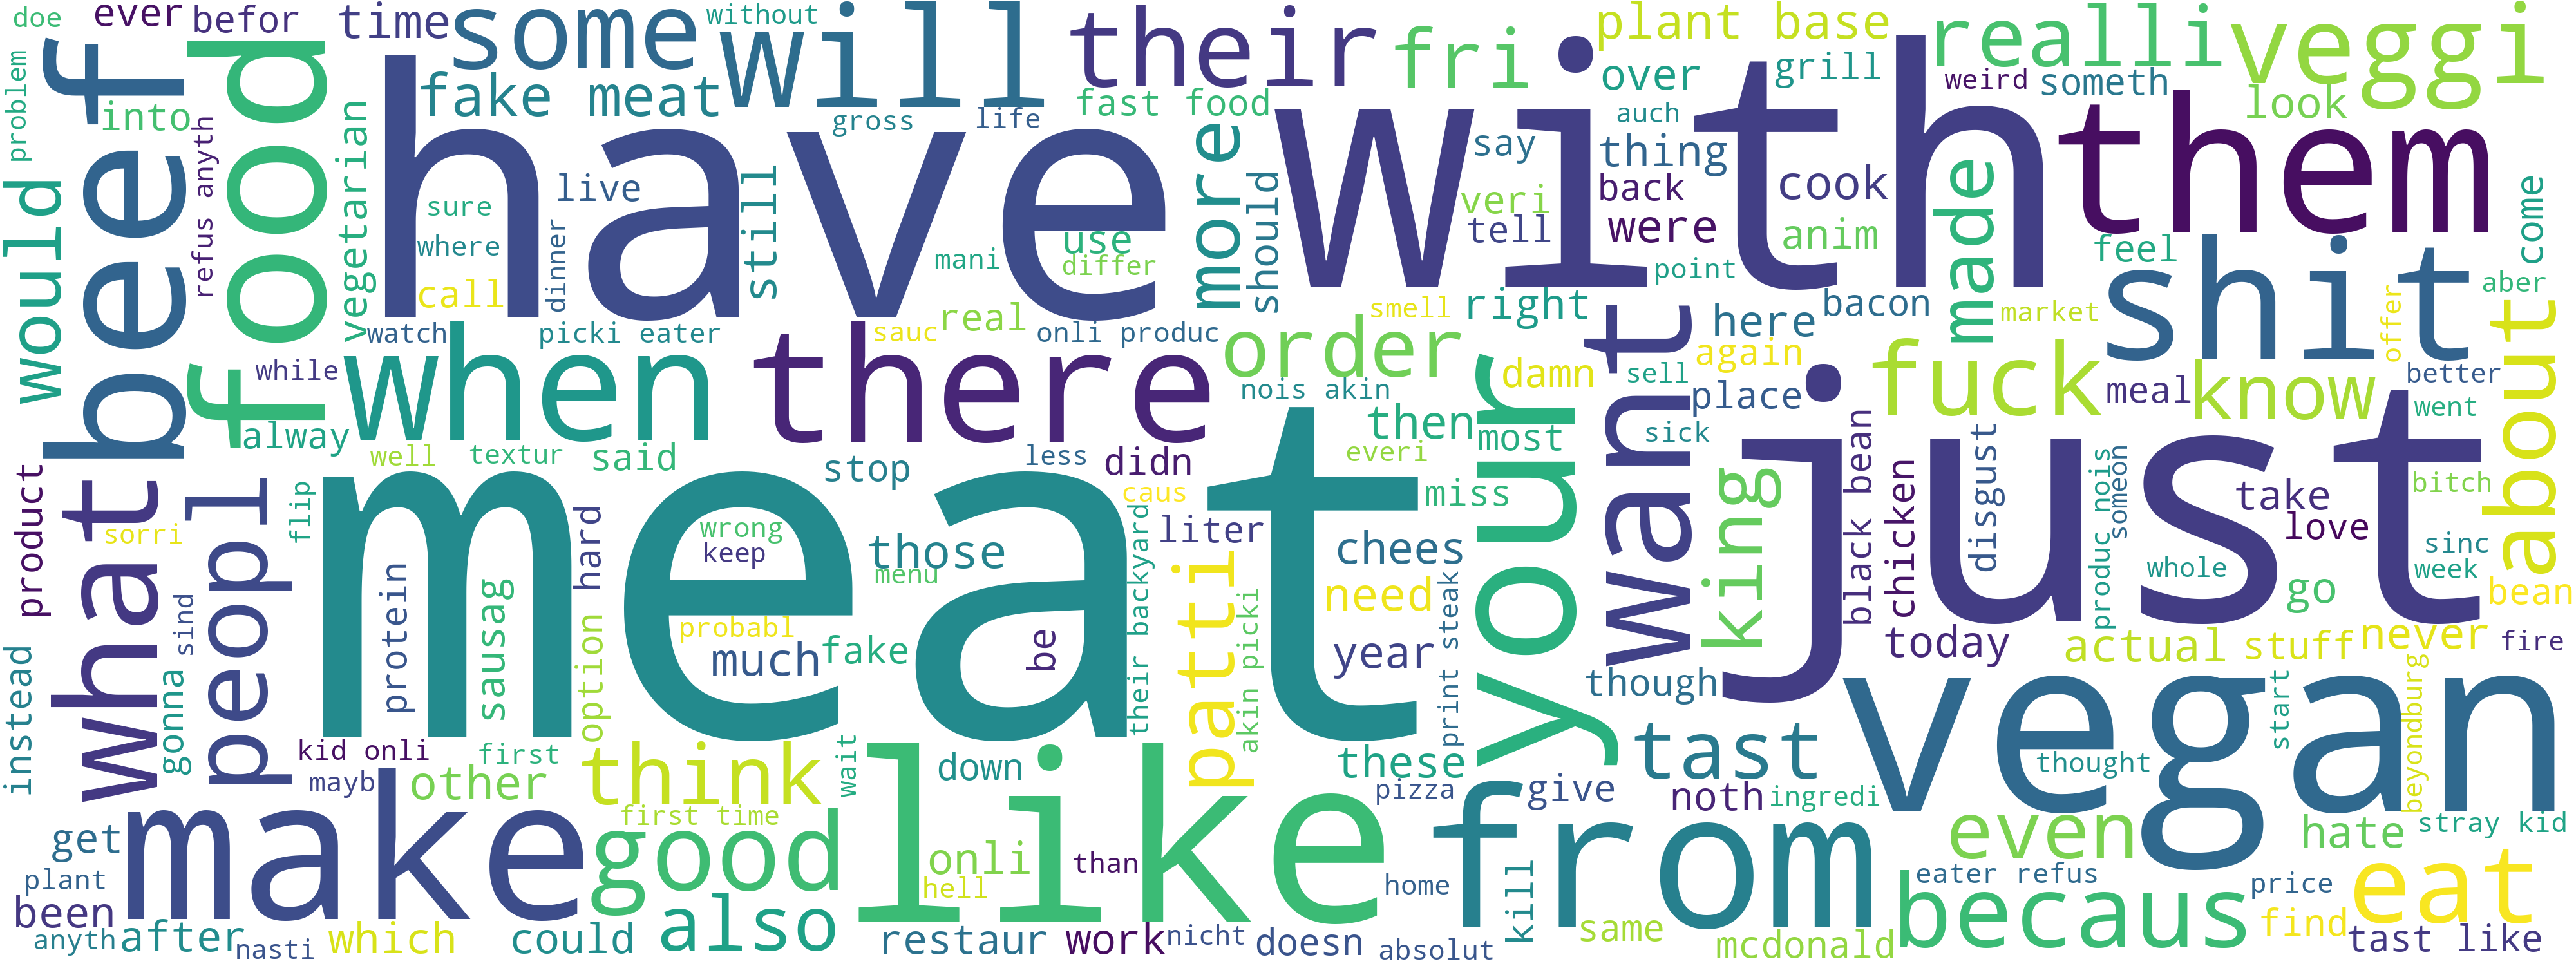 Wordcloud for Beyond tweets with negative sentiment